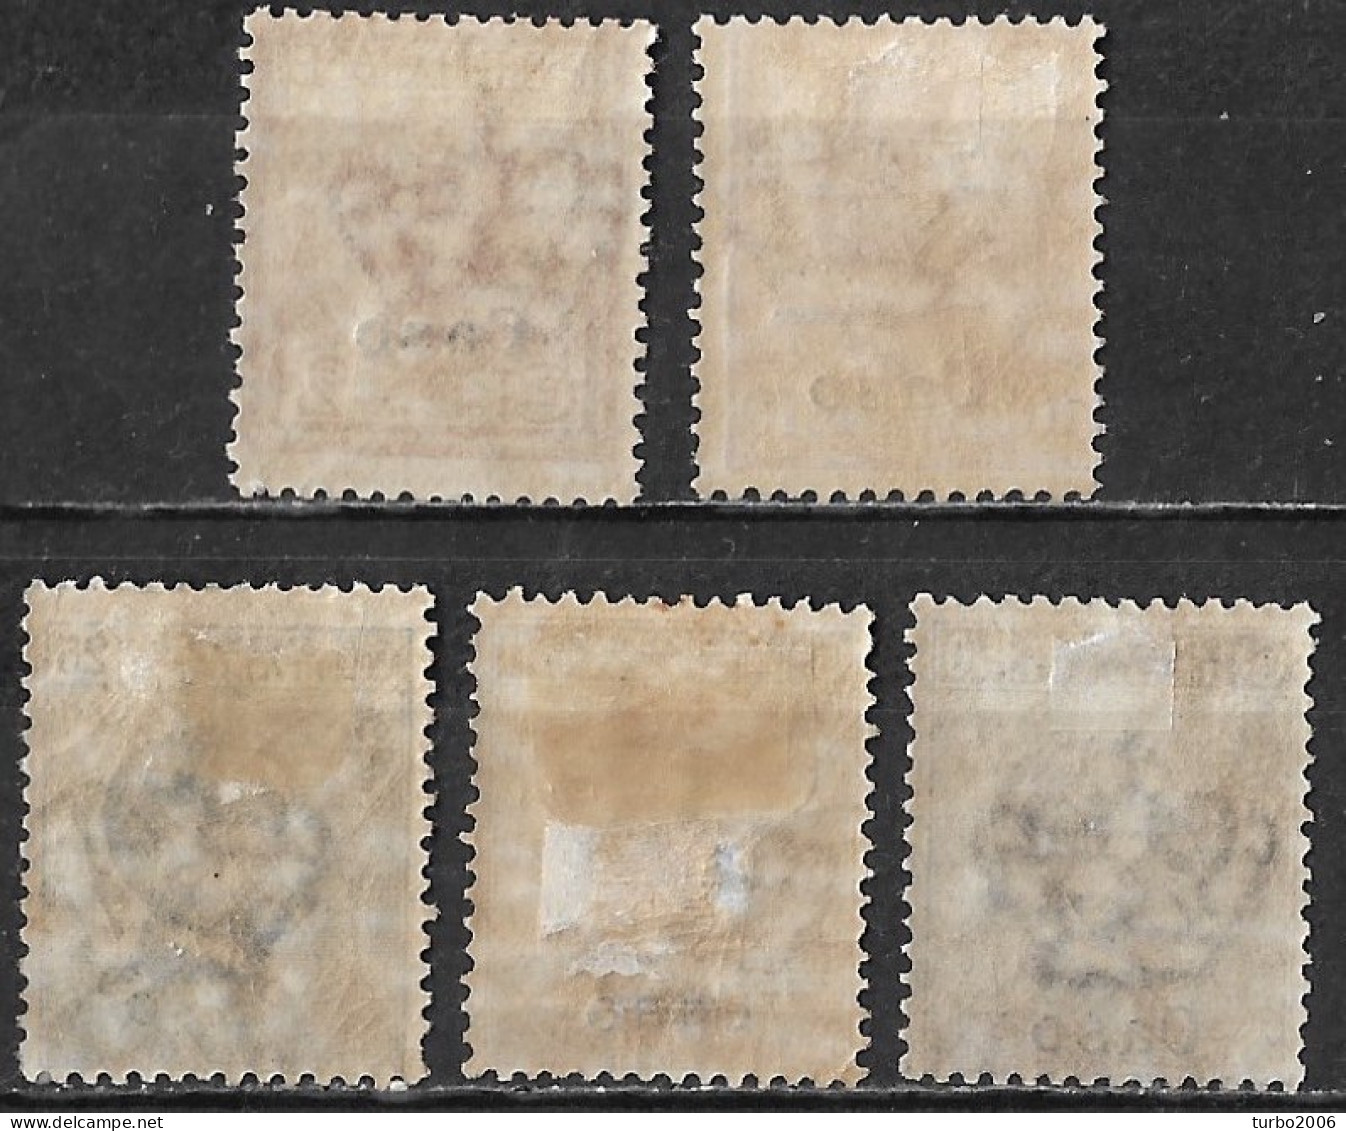 DODECANESE 1912 Italian Stamps With Black Overprint CASO 5 Values From The Set Vl. 1-3-5/7 MH - Dodekanesos